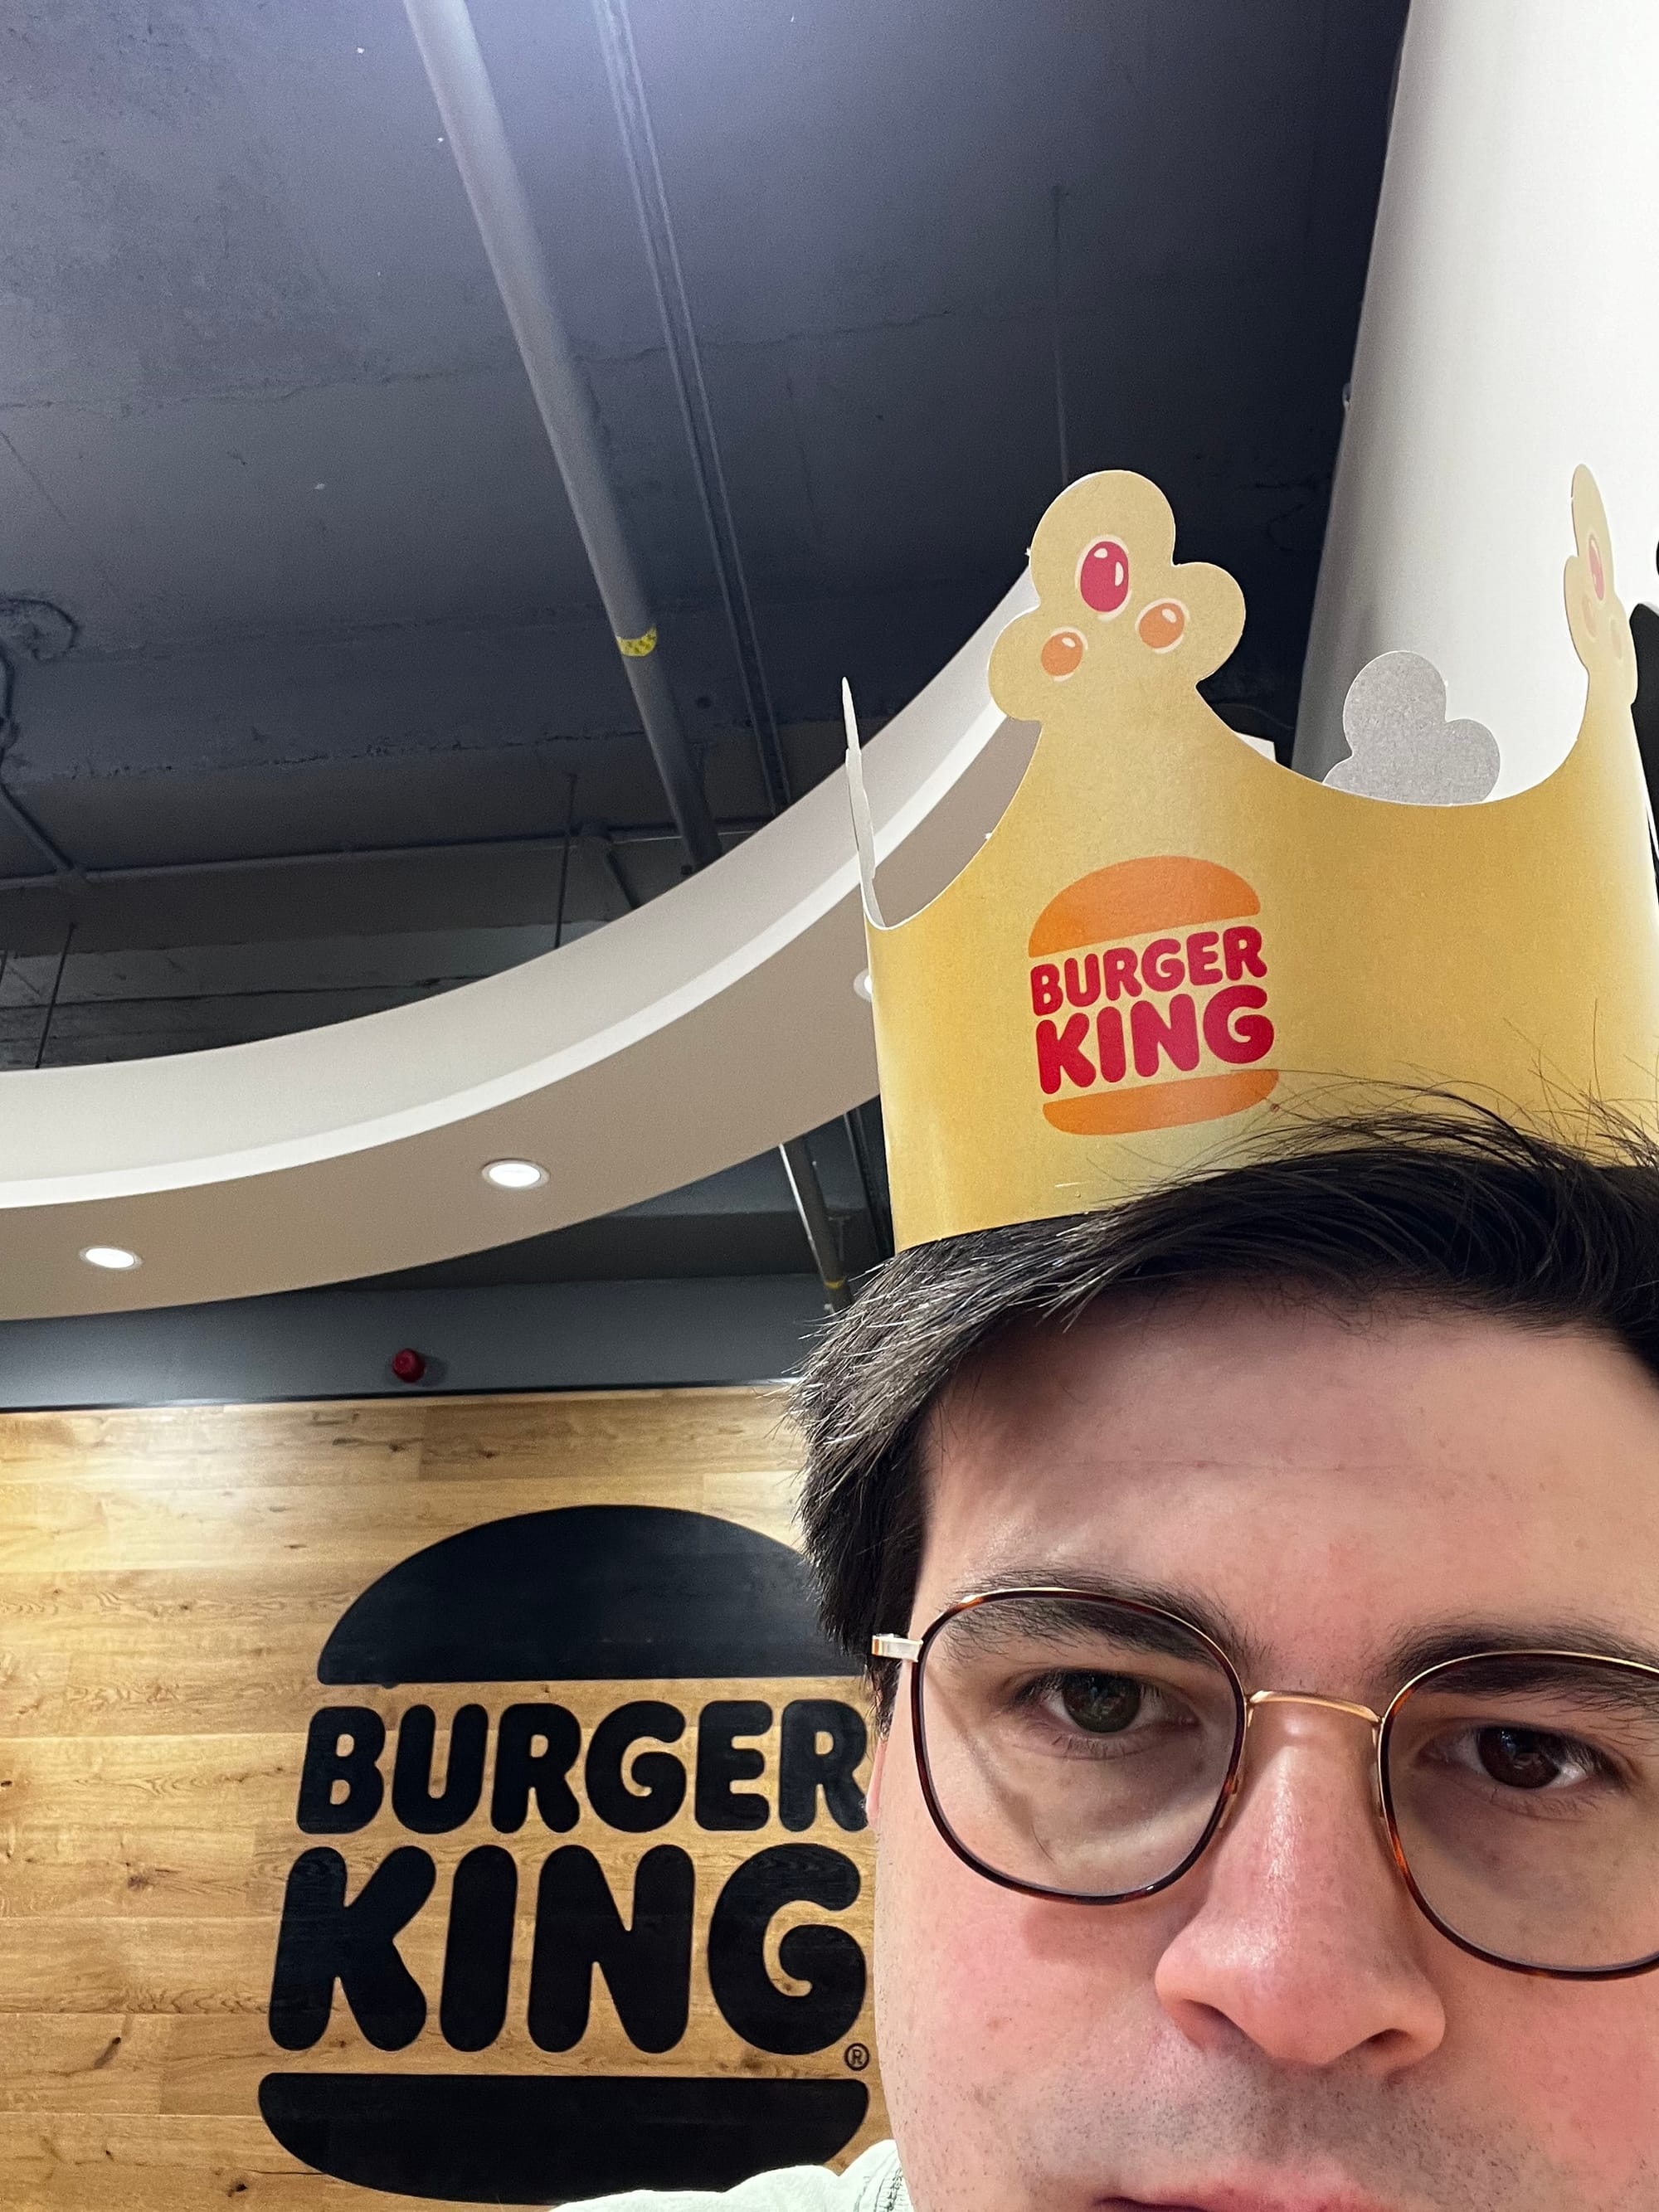 The author sits in front of the Burger King logo while wearing a Burger King crown.